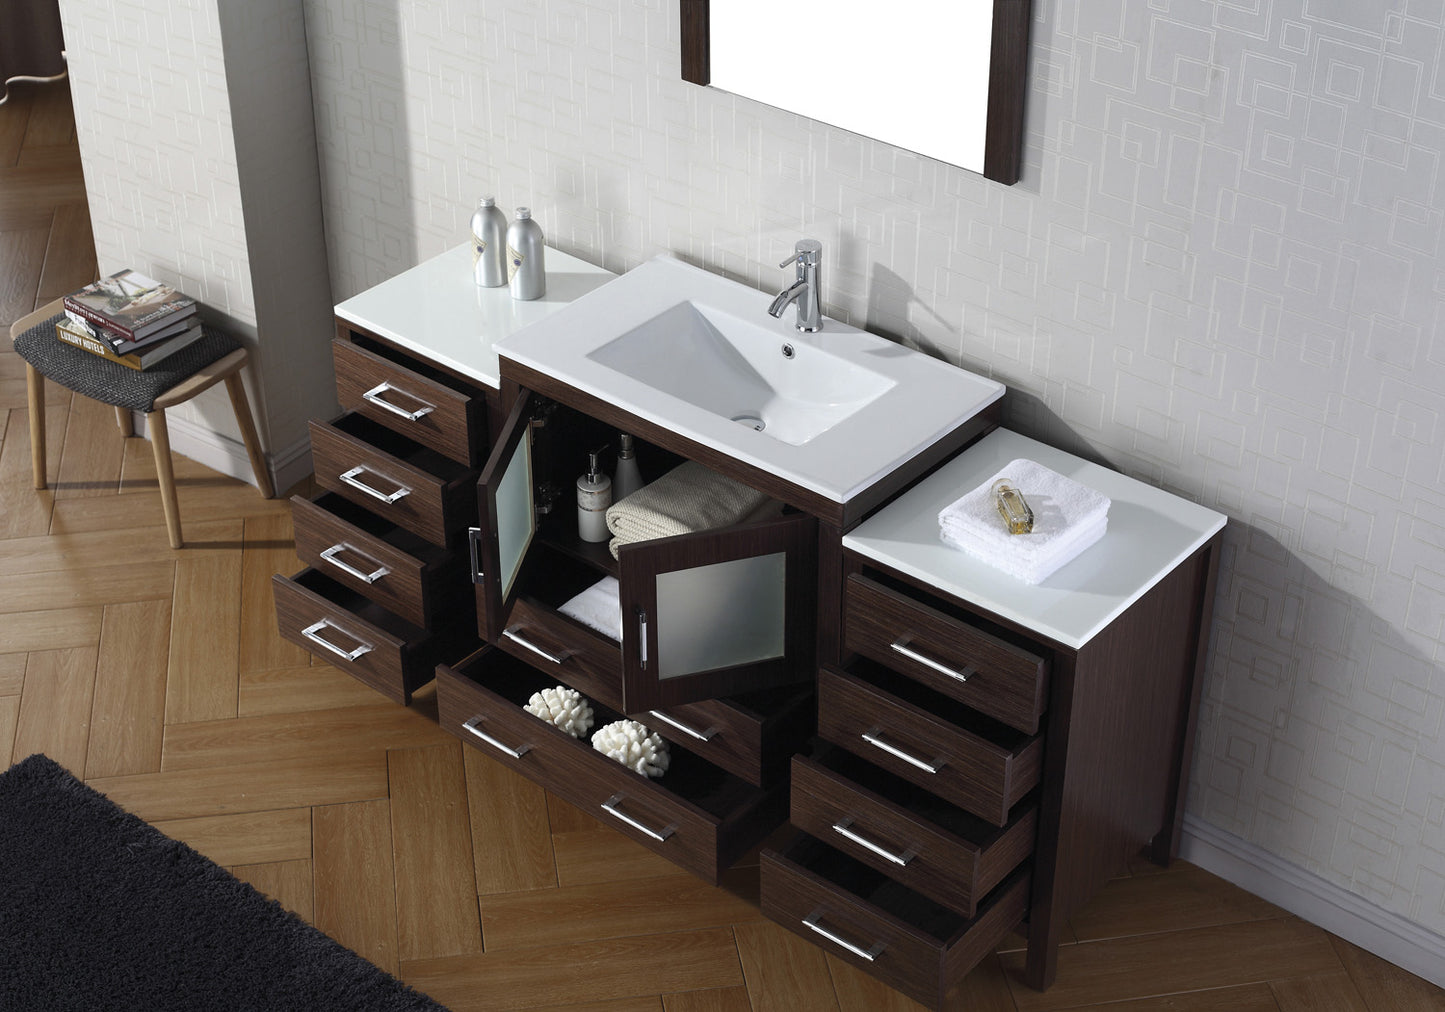 Virtu USA Dior 68" Single Bath Vanity in Espresso with Slim White Ceramic Top and Square Sink with Polished Chrome Faucet and Mirror - Luxe Bathroom Vanities Luxury Bathroom Fixtures Bathroom Furniture